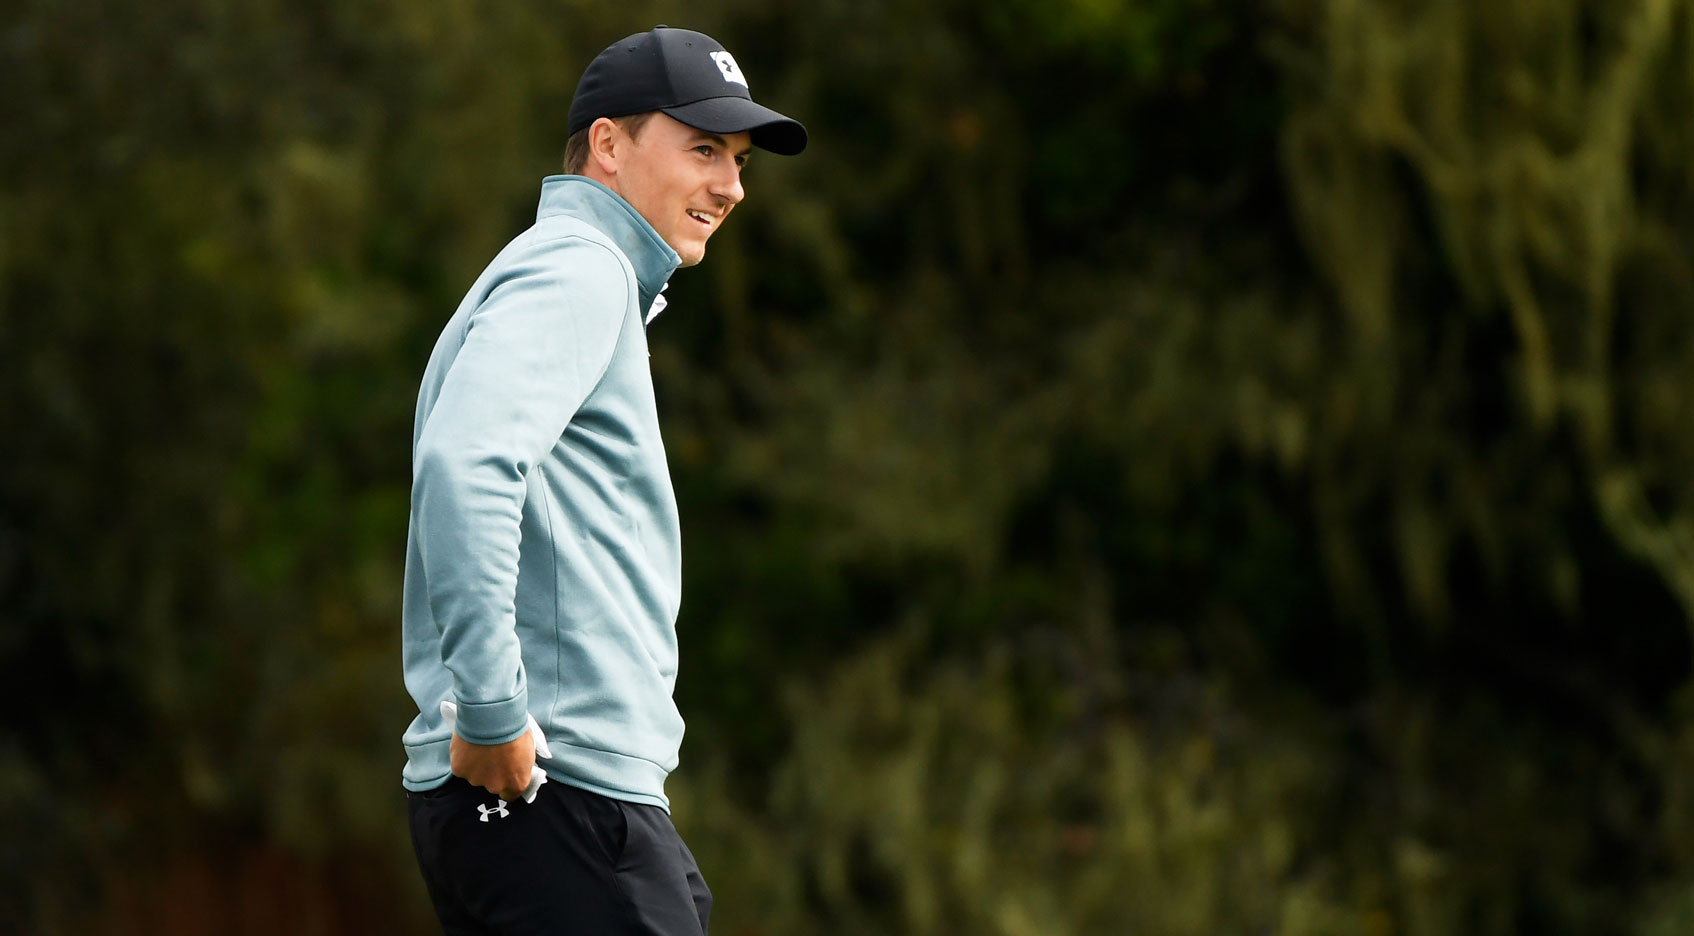 Jordan Spieth takes two-shot lead at AT&T Pebble Beach Pro-Am